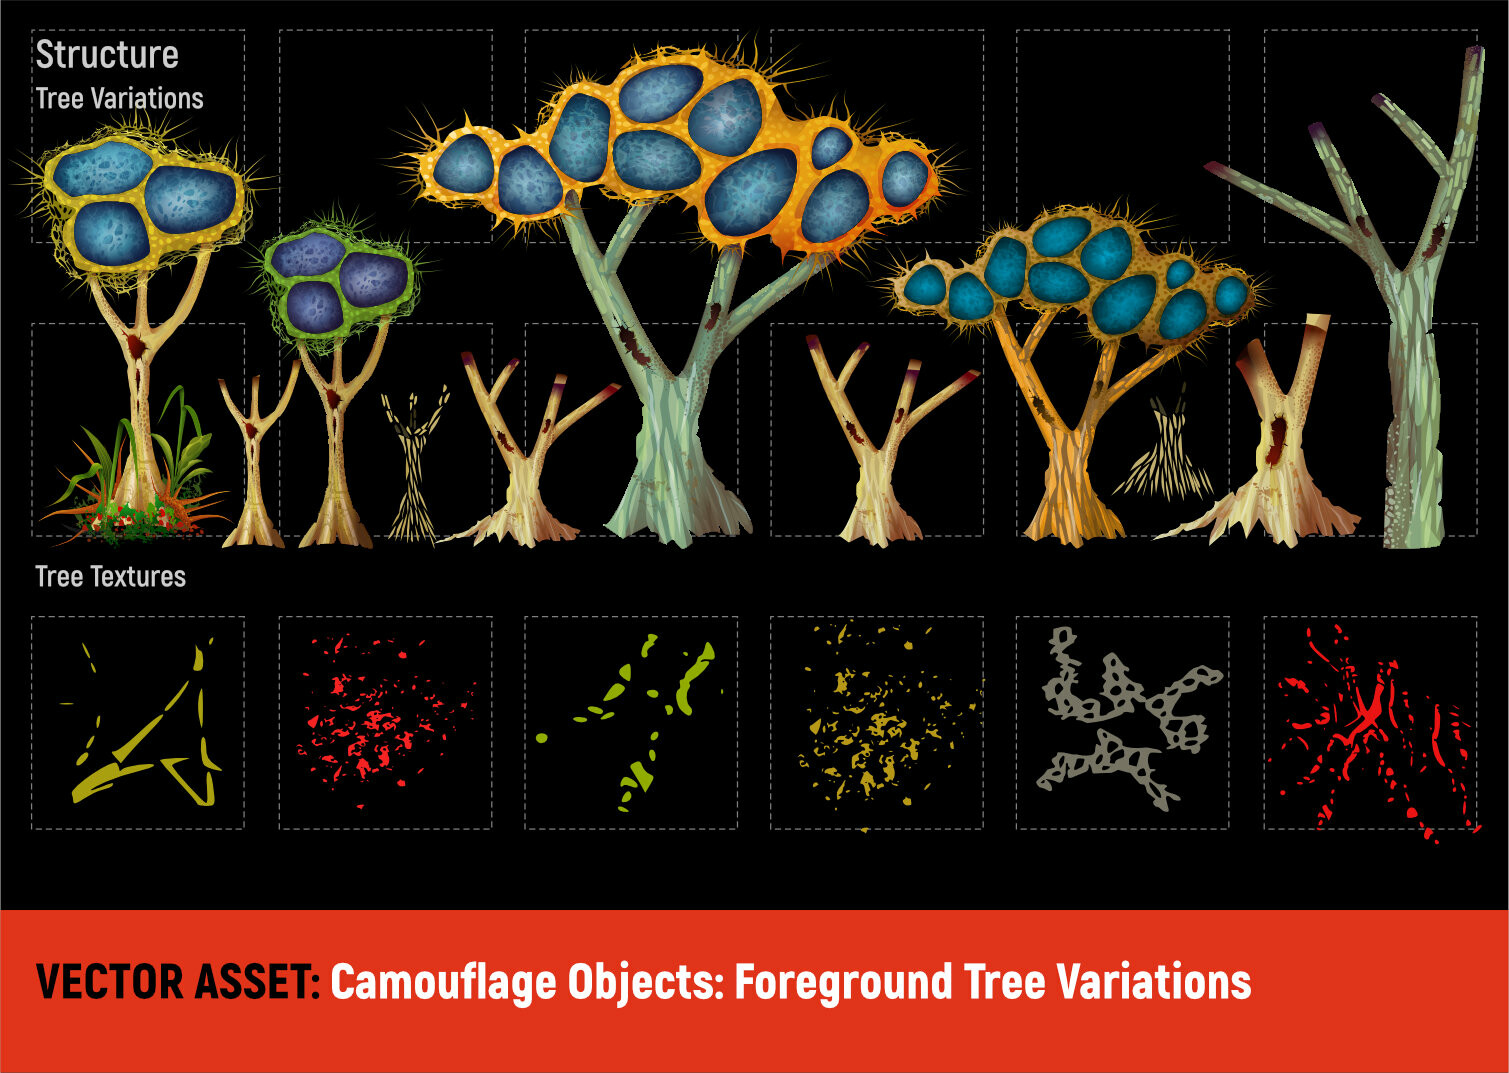 Vector Assets
Camouflage I Objects: Foreground Tree Variations